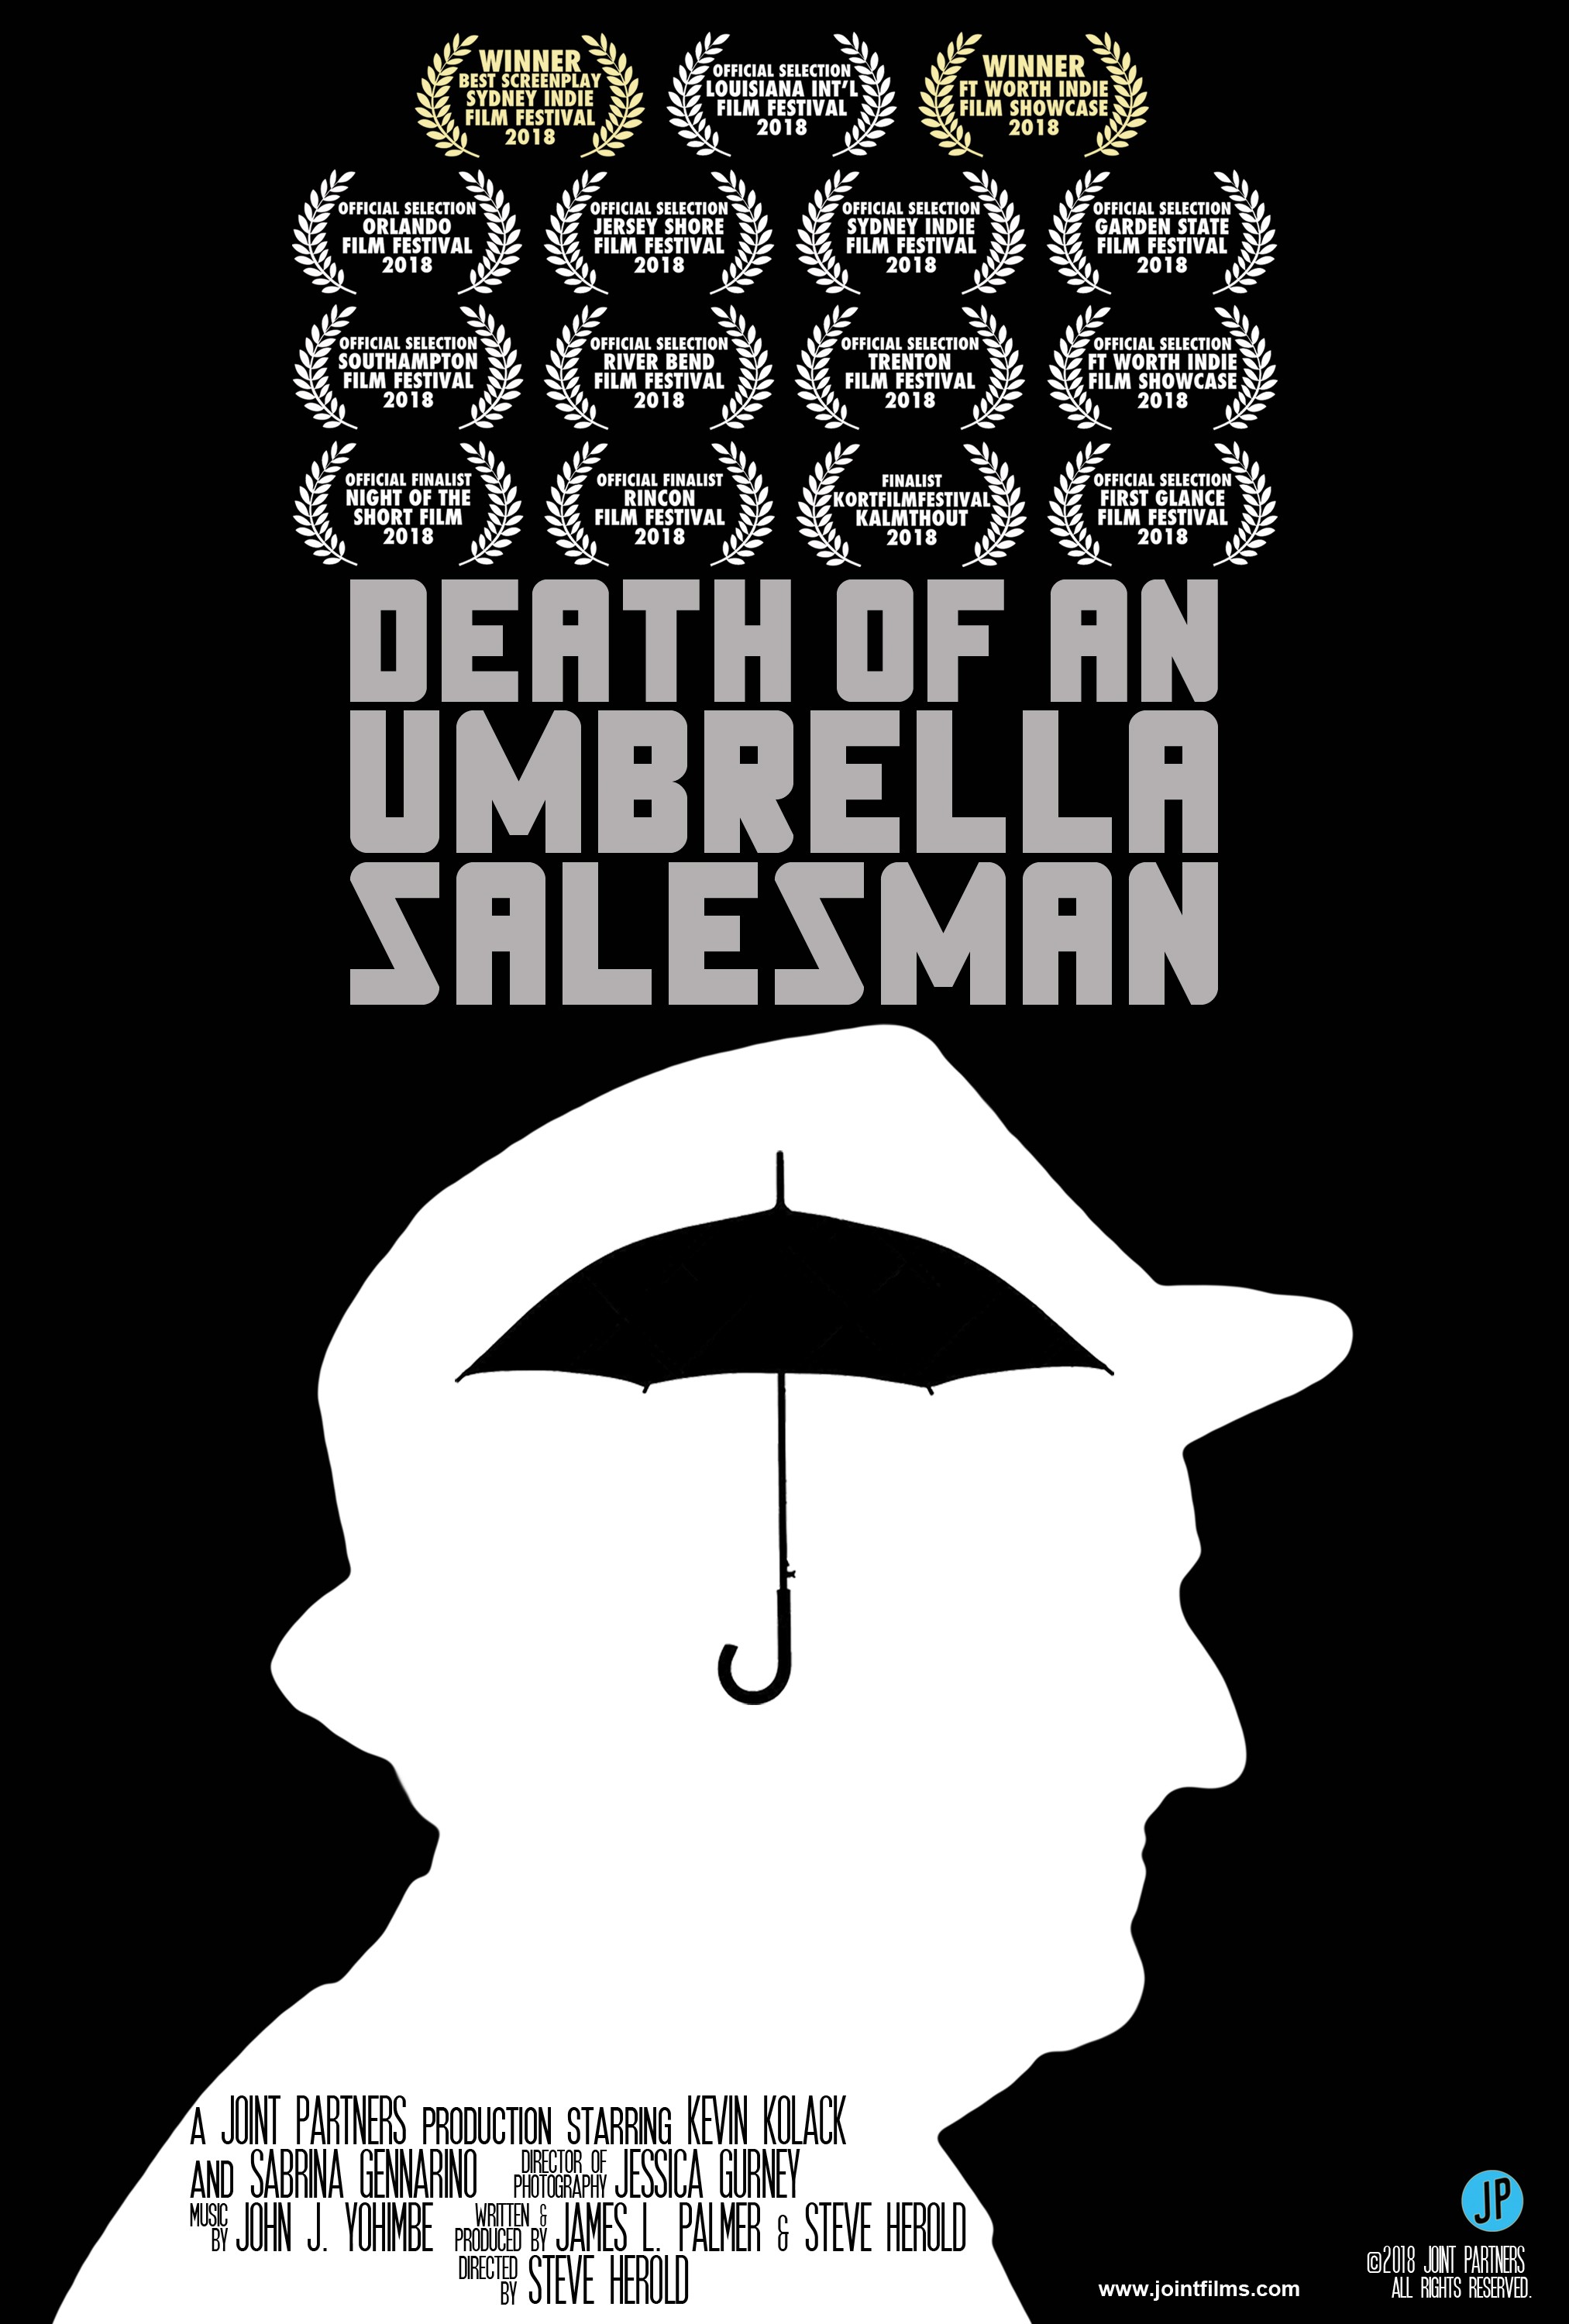 Mega Sized Movie Poster Image for Death of an Umbrella Salesman